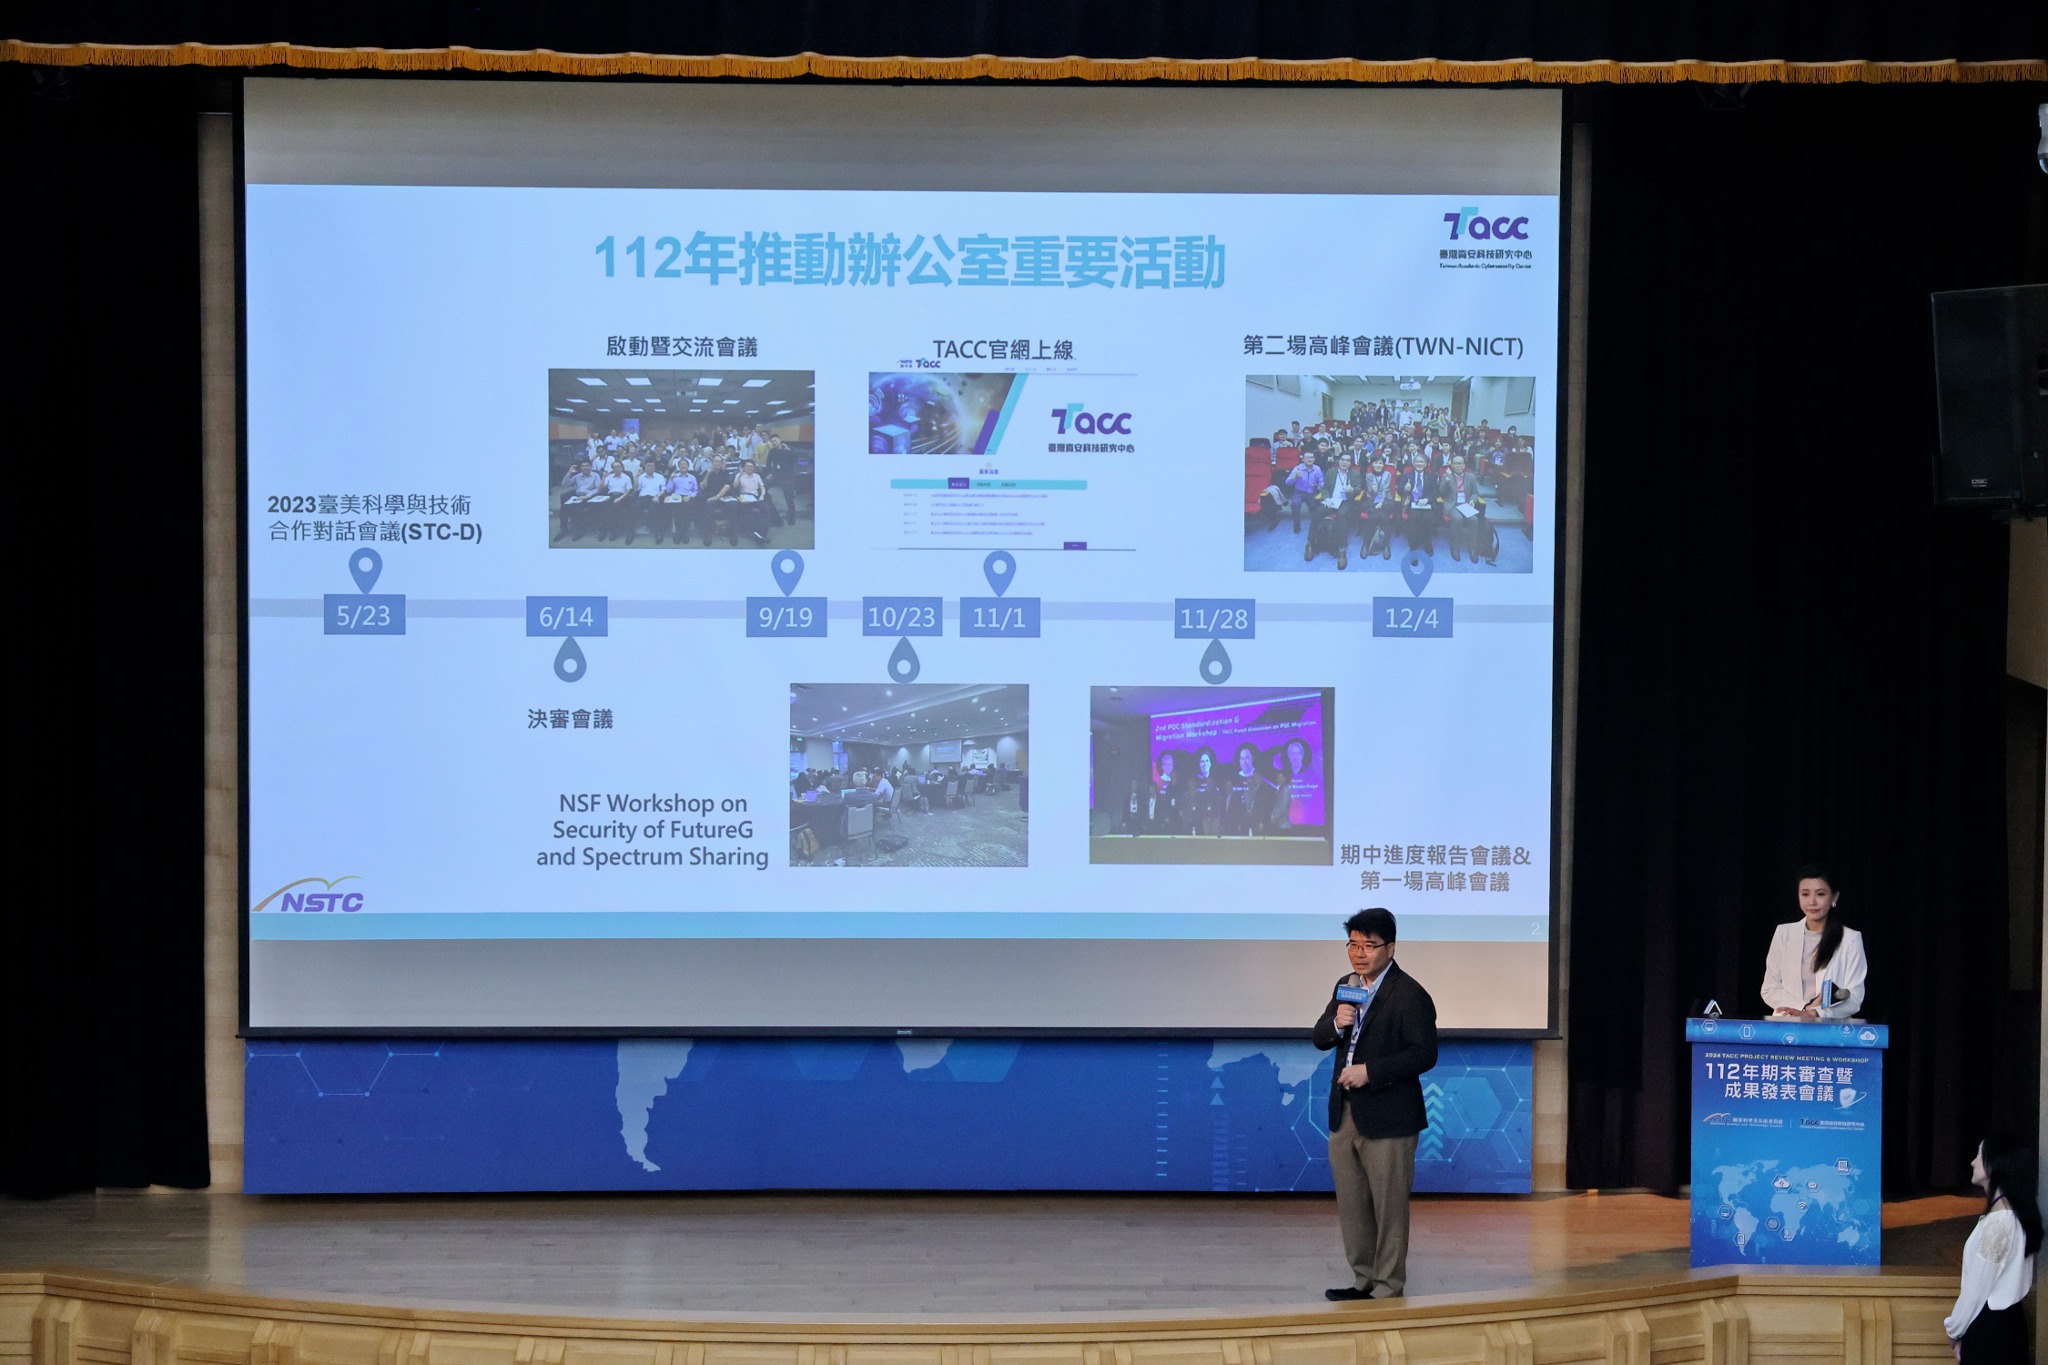 Prof. Wei-Chung Teng, Principal Investigator of TACC, presented the status of the TACC Project